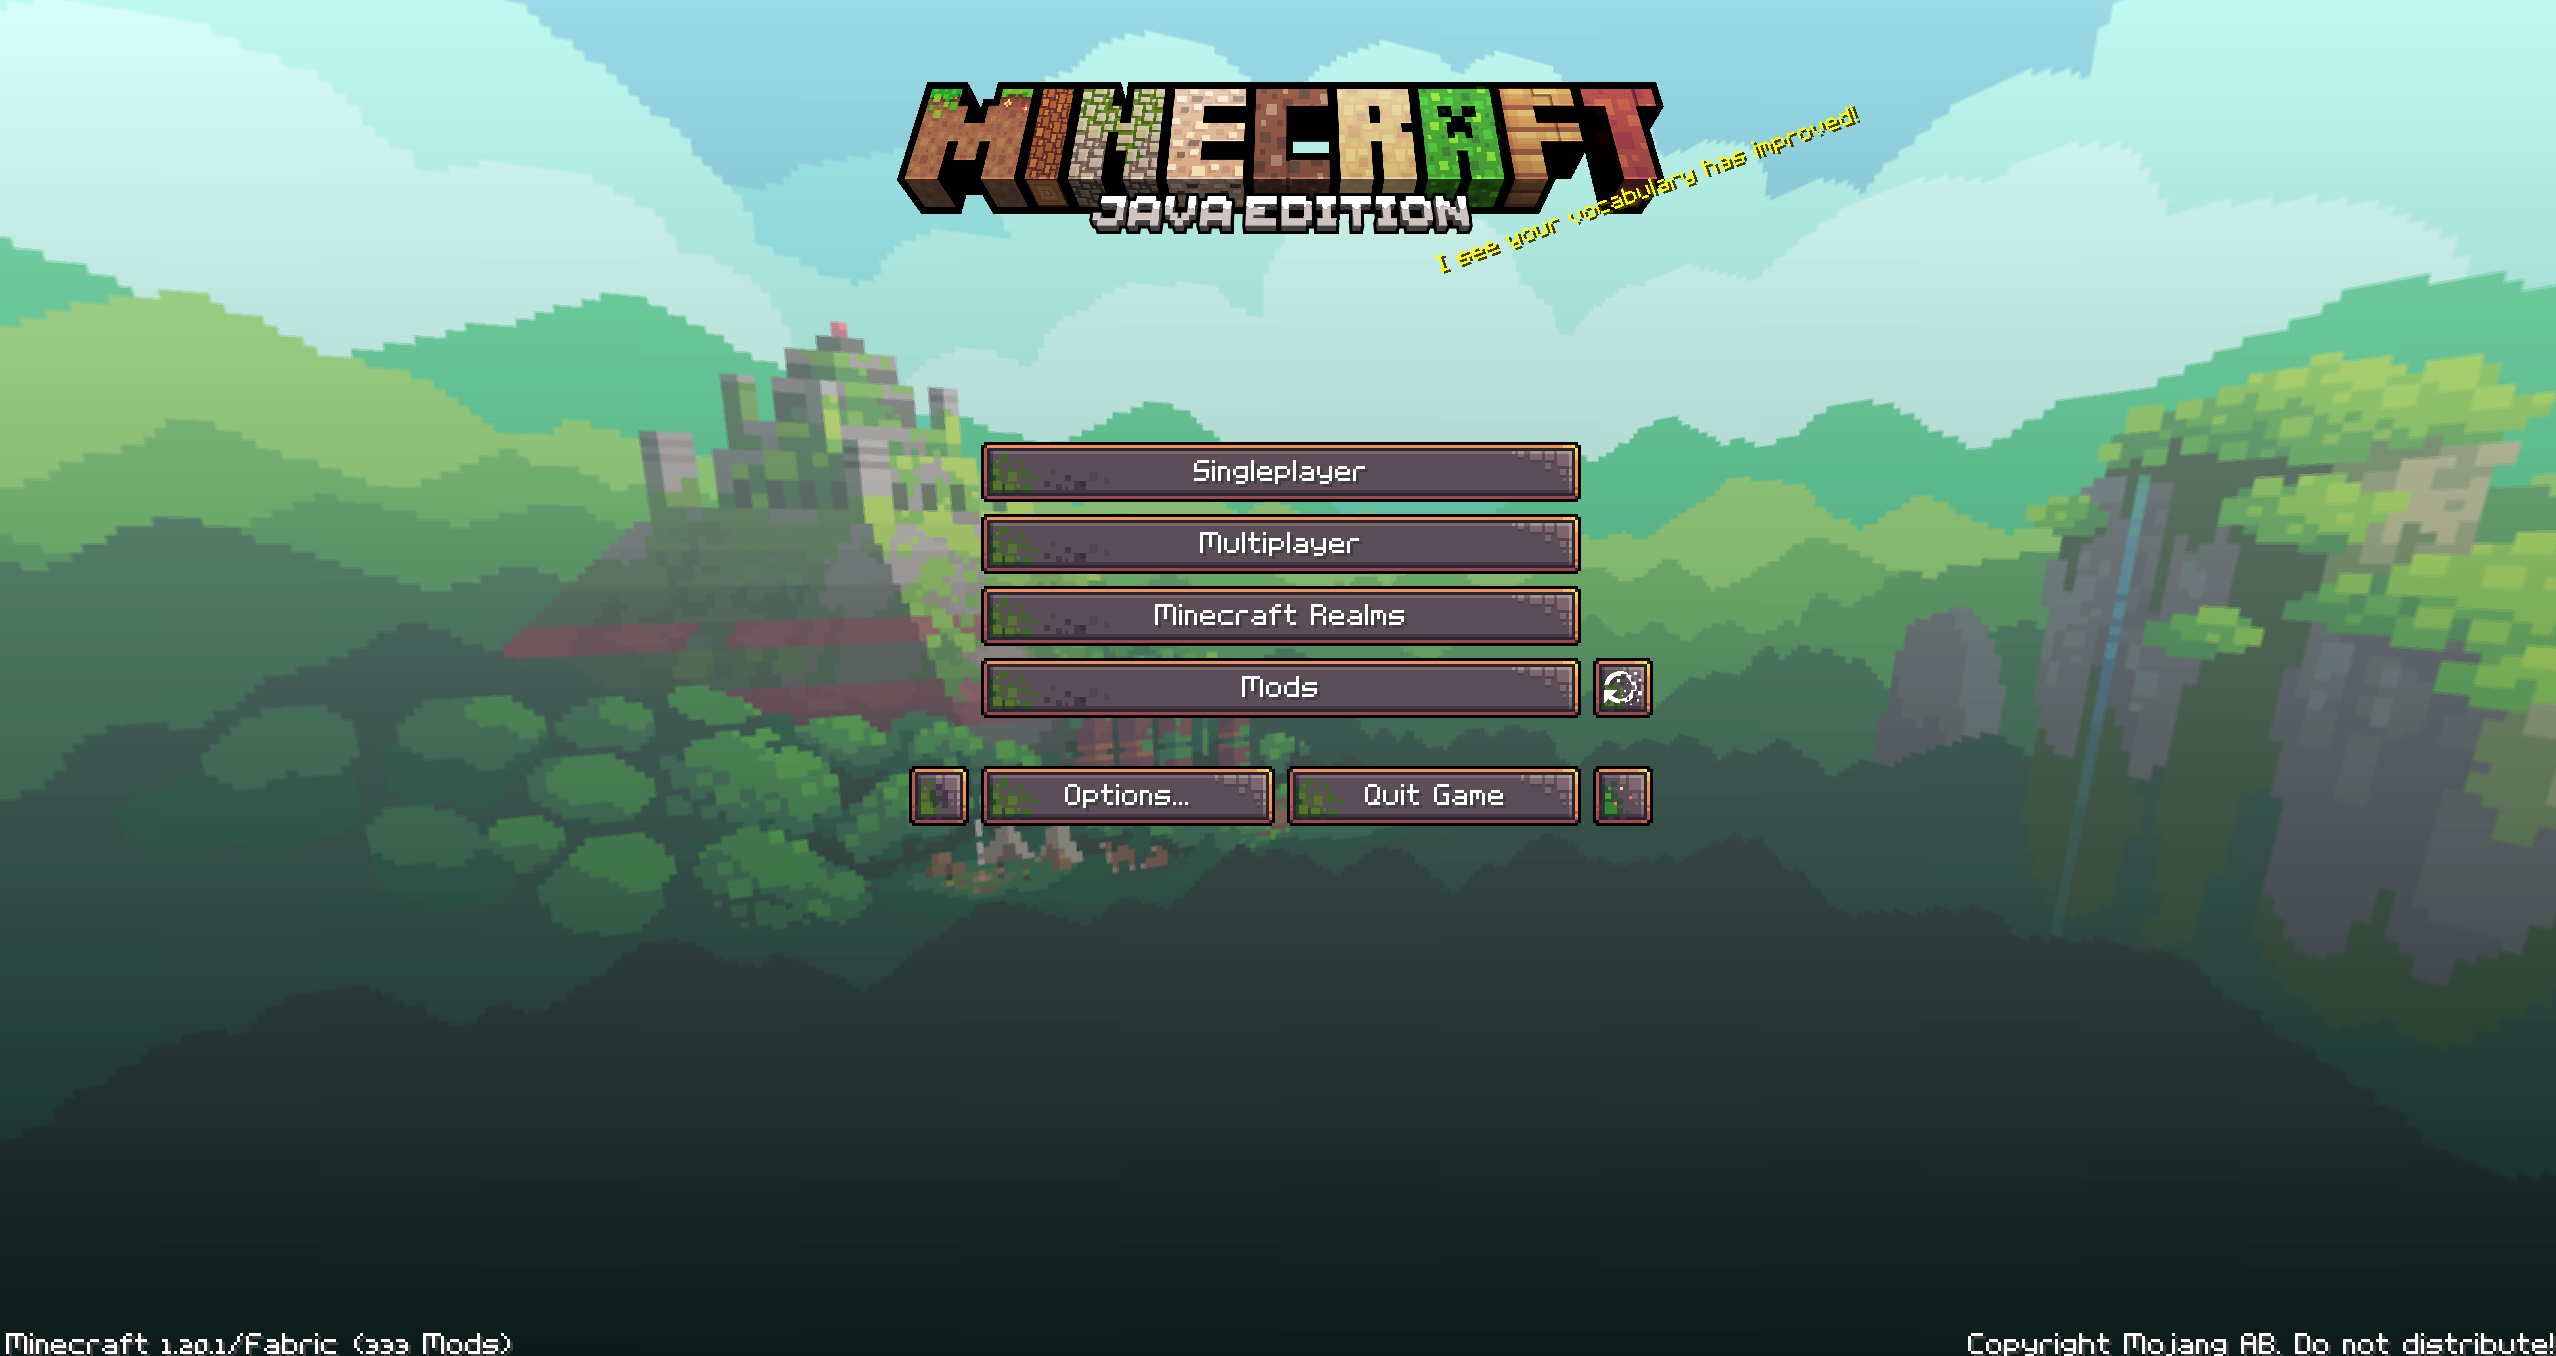 The Title Screen